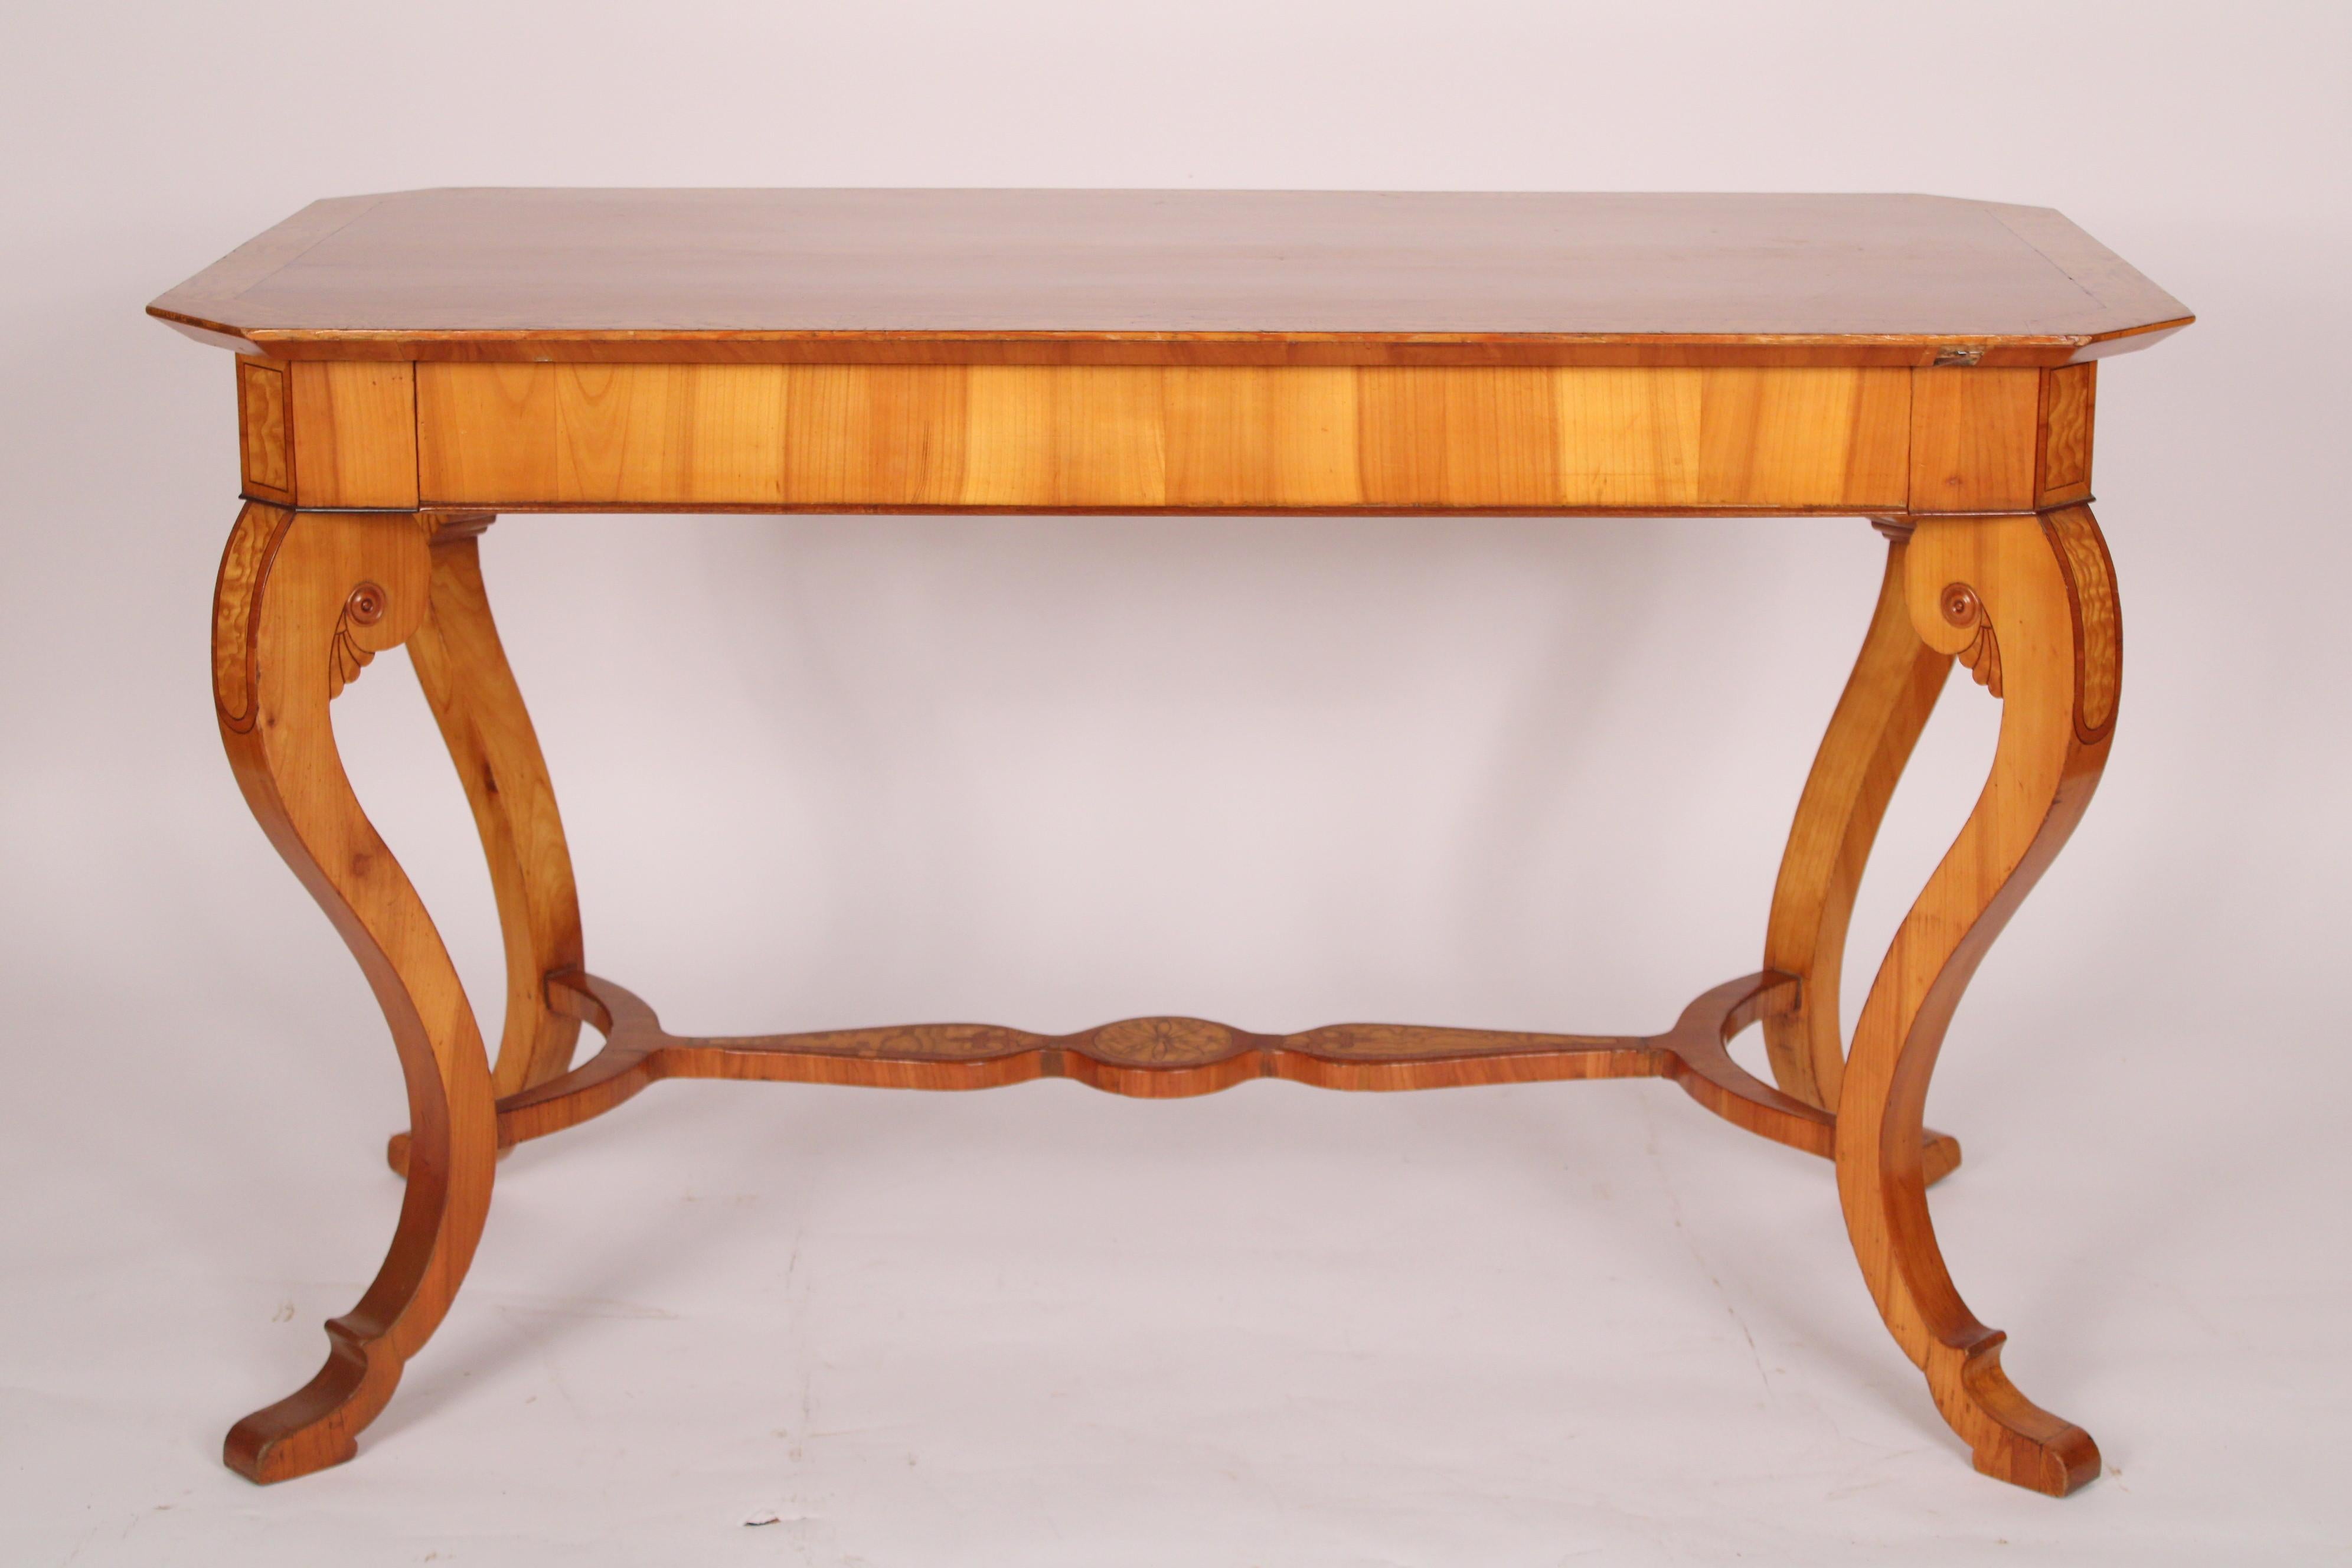 Antique Biedermeier style cherry wood and ash writing table, late 19th century. With a rectangular overhanging cherry wood top with canted corners and ash banding, a long frieze drawer, resting on 4 cabriole cherry wood legs with ash inlay, joined